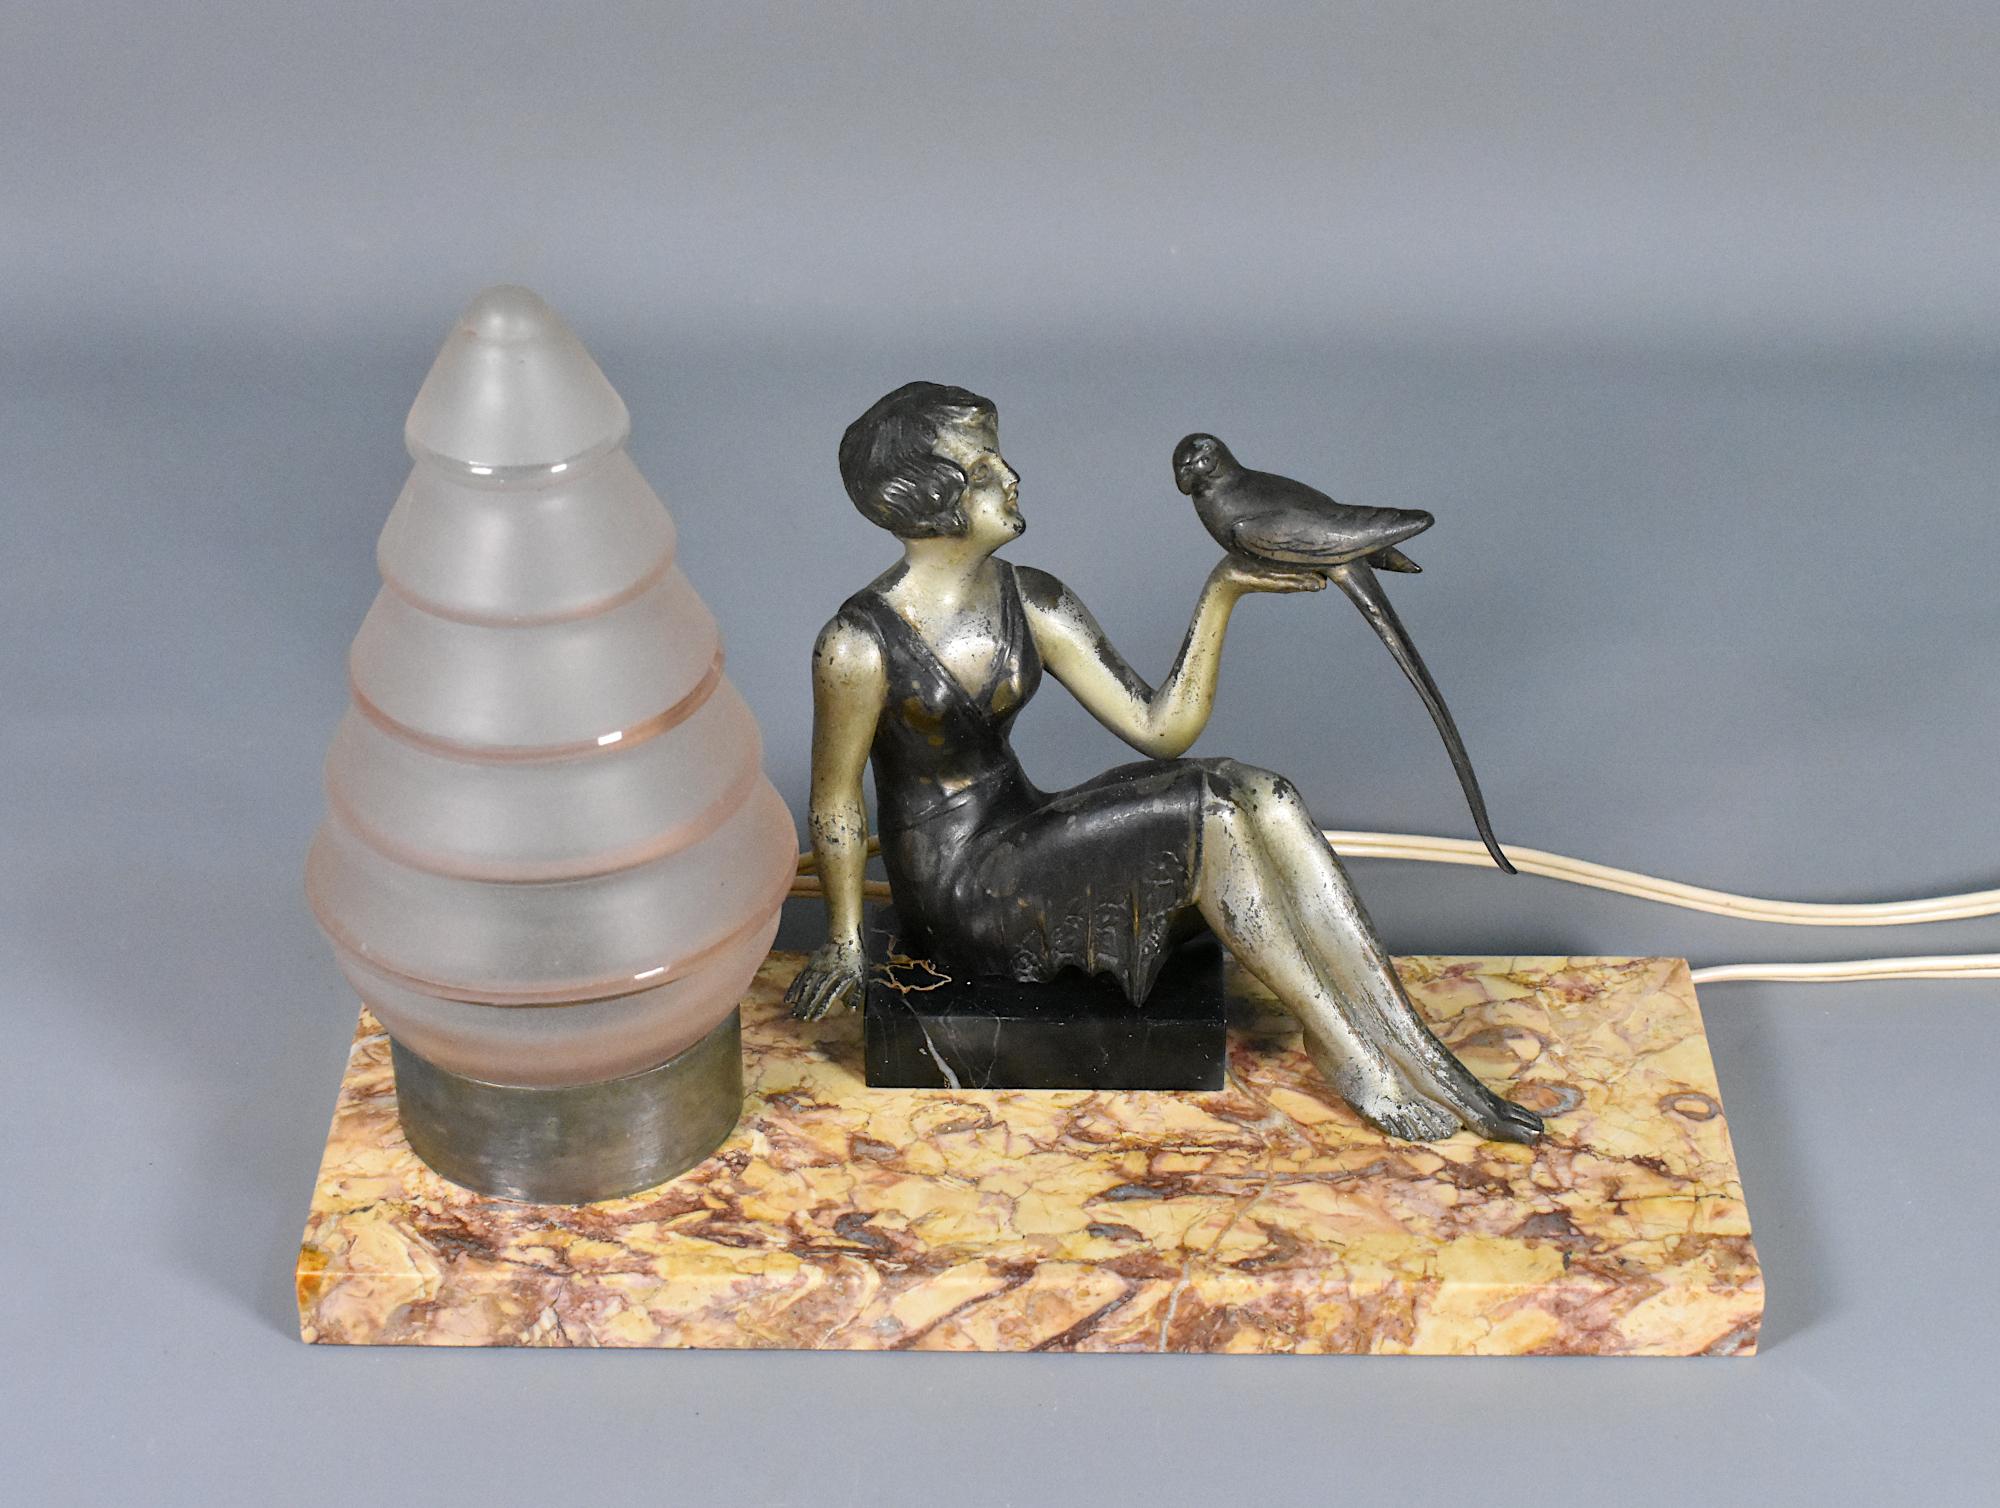 French Art Deco Table Lamp 

A delightful Art Deco Table Lamp featuring a stylish lady, dressed in the fashion of the day with a bob haircut. With her arm outstretched, she holding a bird.  

The spelter lady figurine is sitting on a small portico